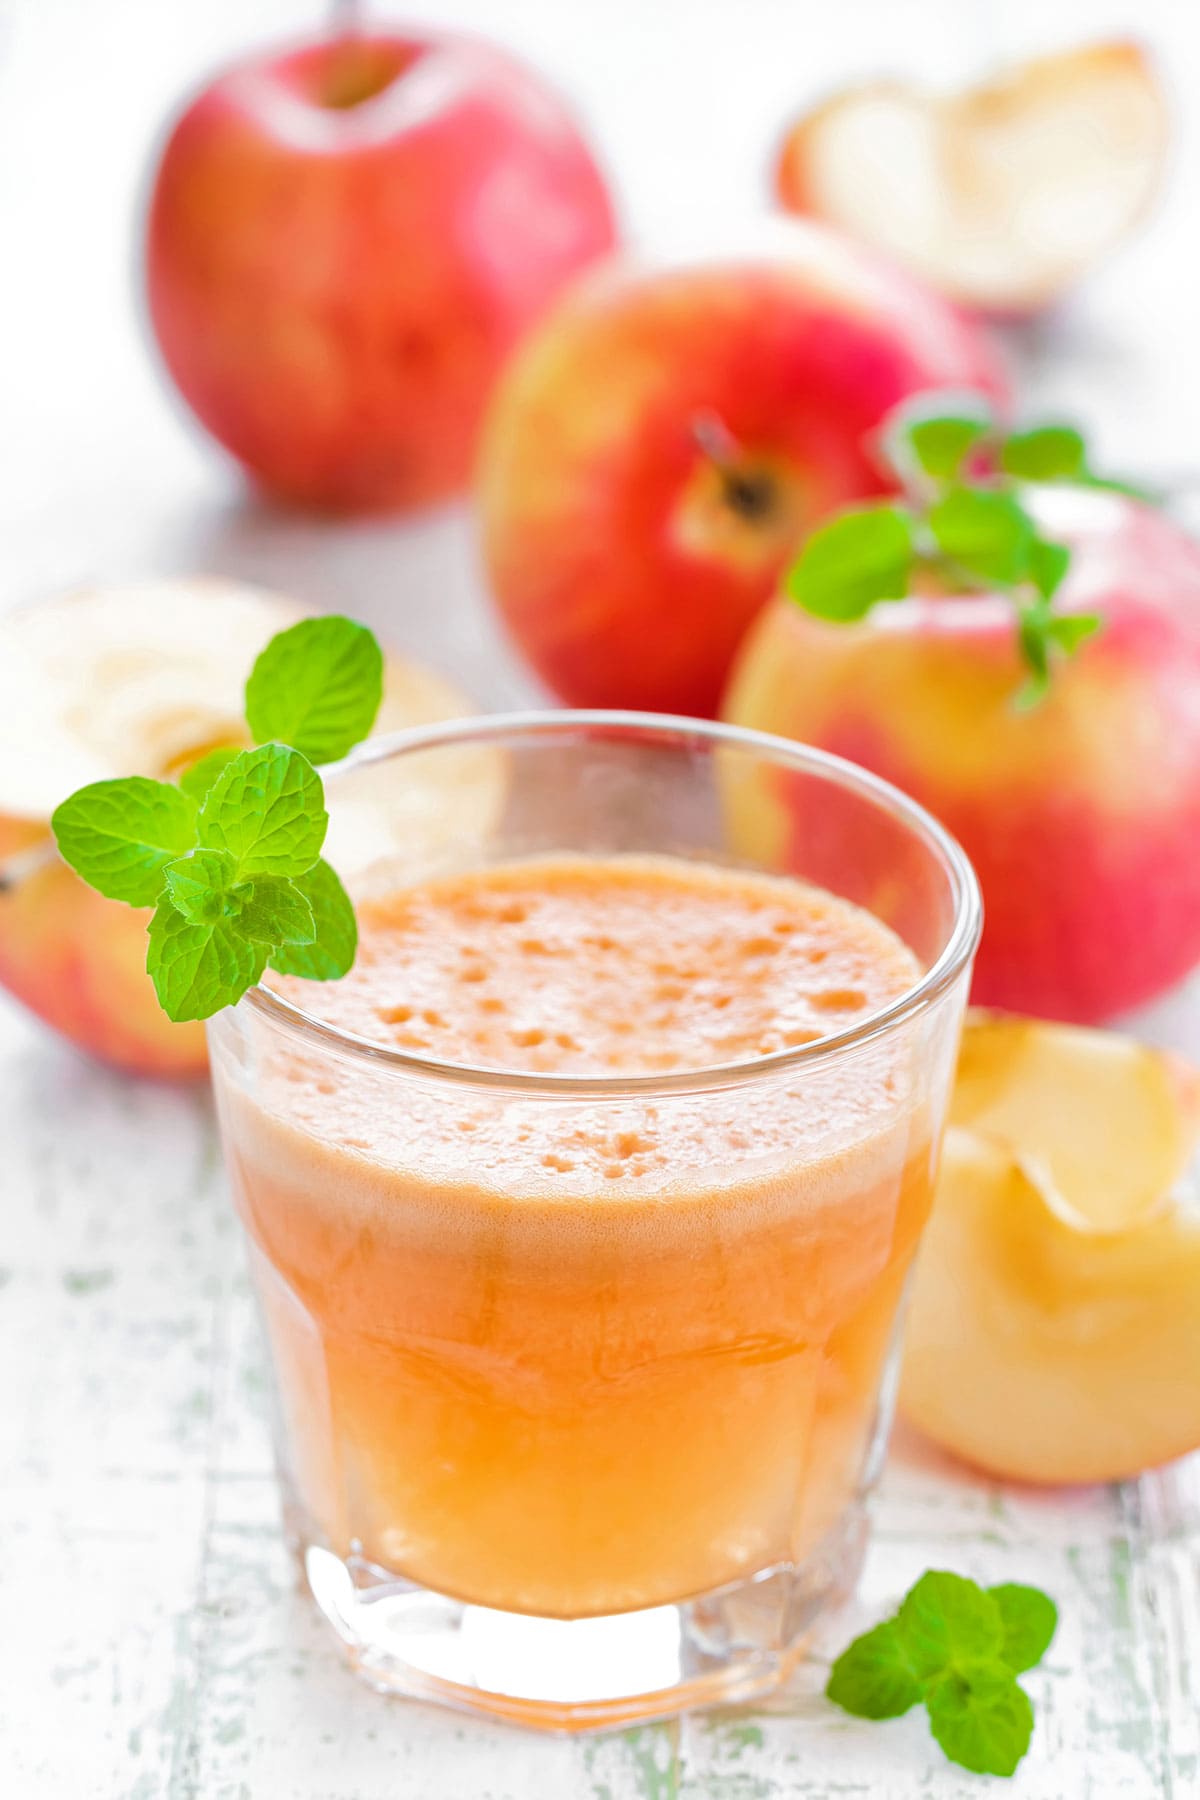 How To Make Apple Juice With a Juicer - Healthy Easy Recipe!